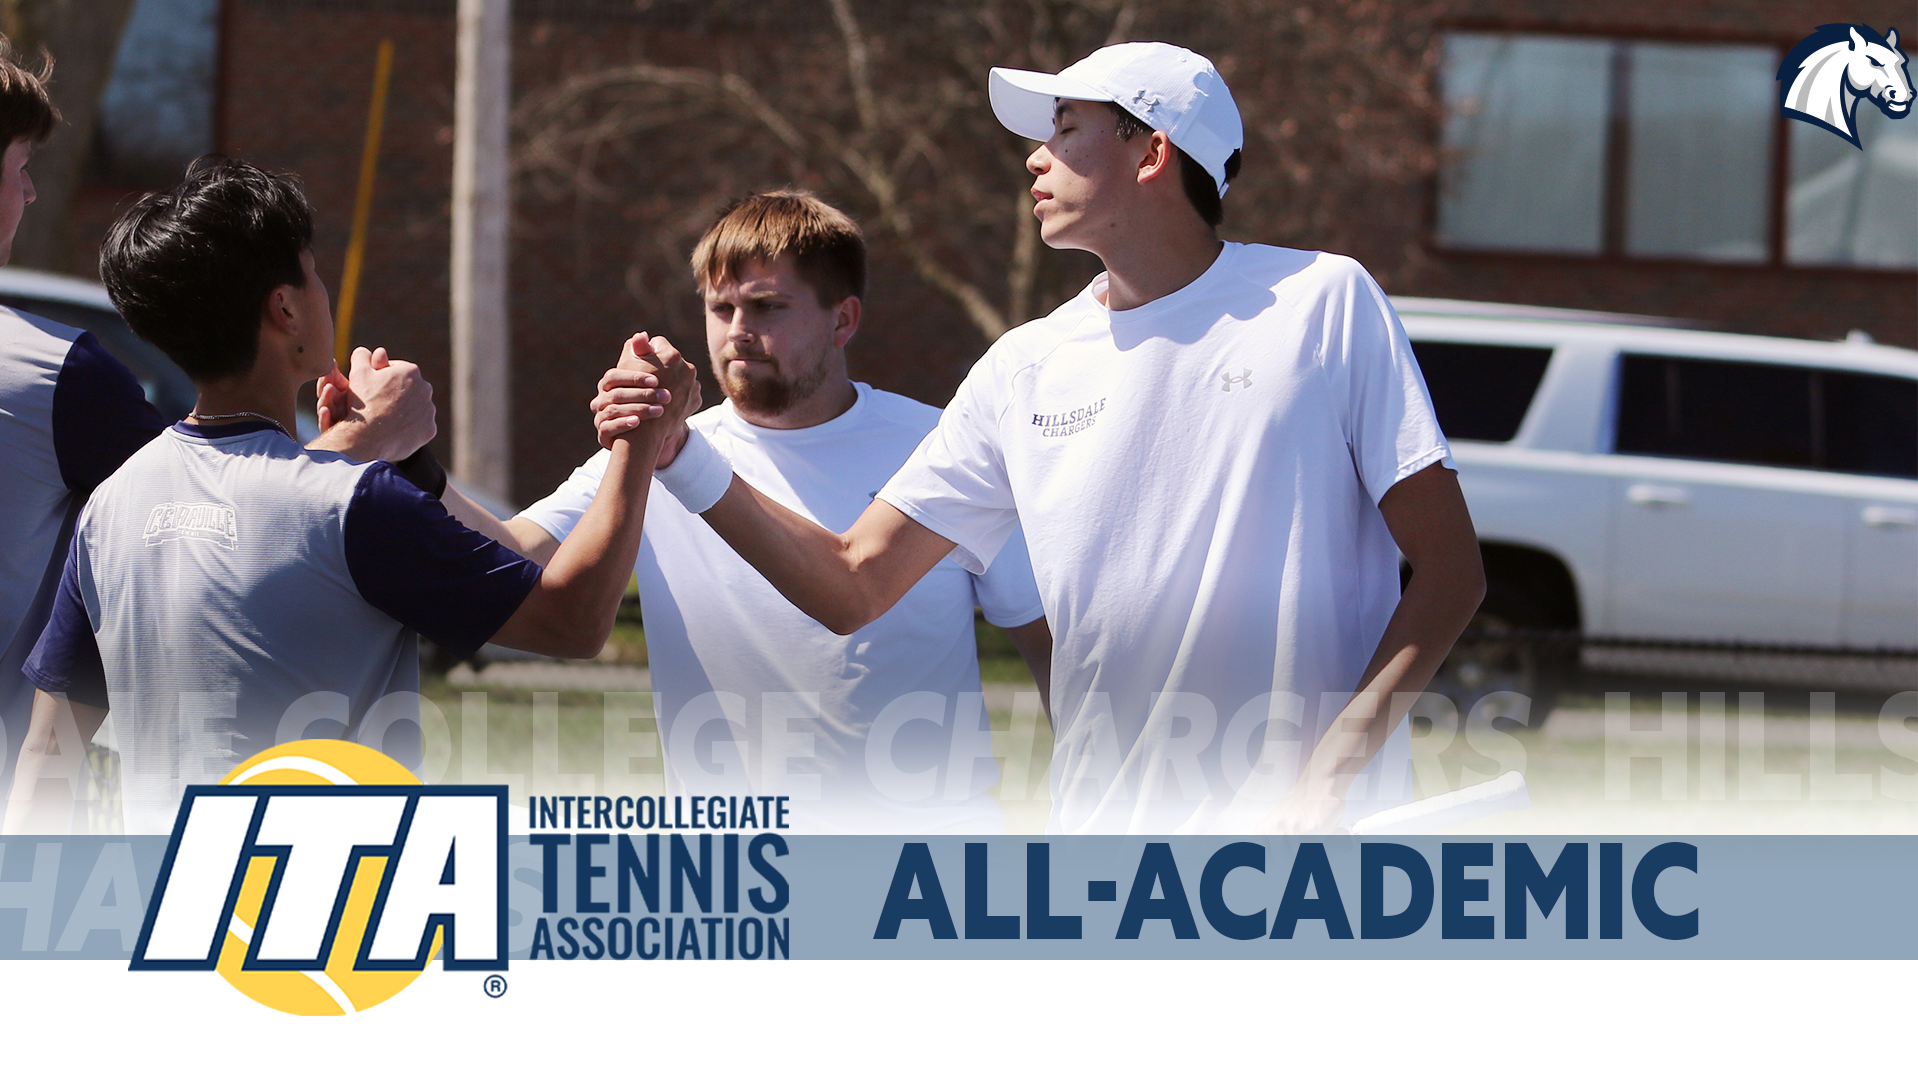 Six Chargers men's tennis players earn ITA Scholar Athlete honors